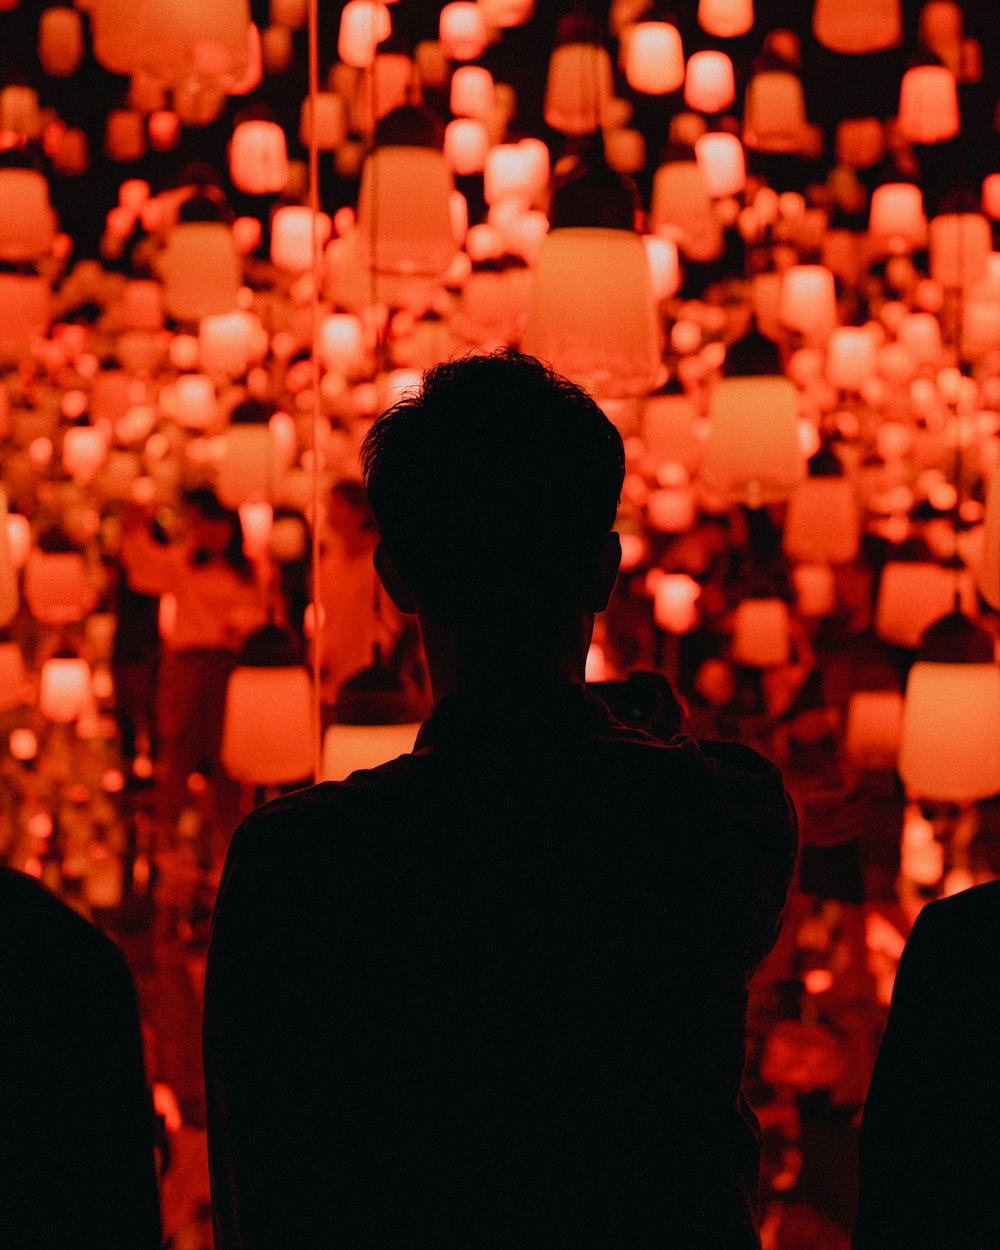 silhouette of people standing near lighted candles during night time